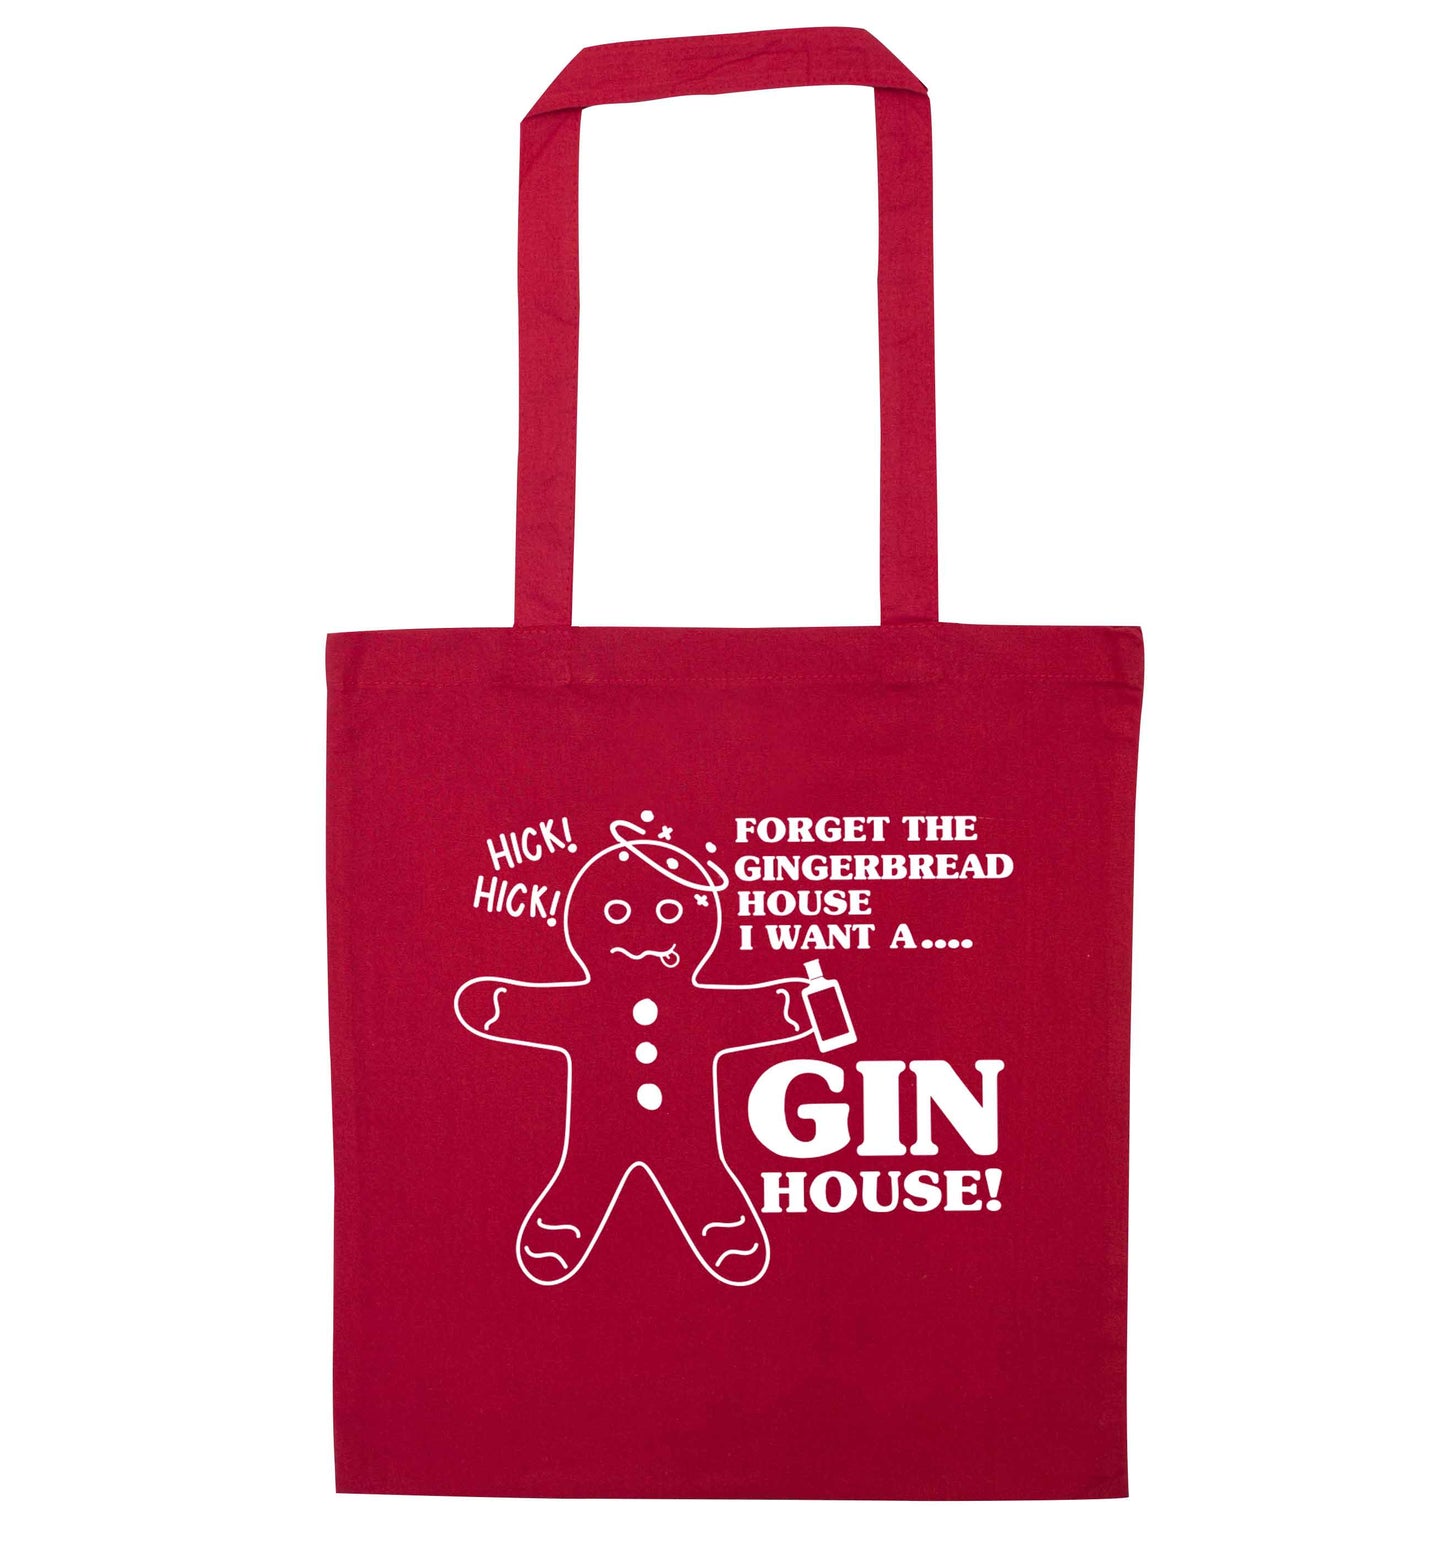 Forget the gingerbread house I want a gin house red tote bag